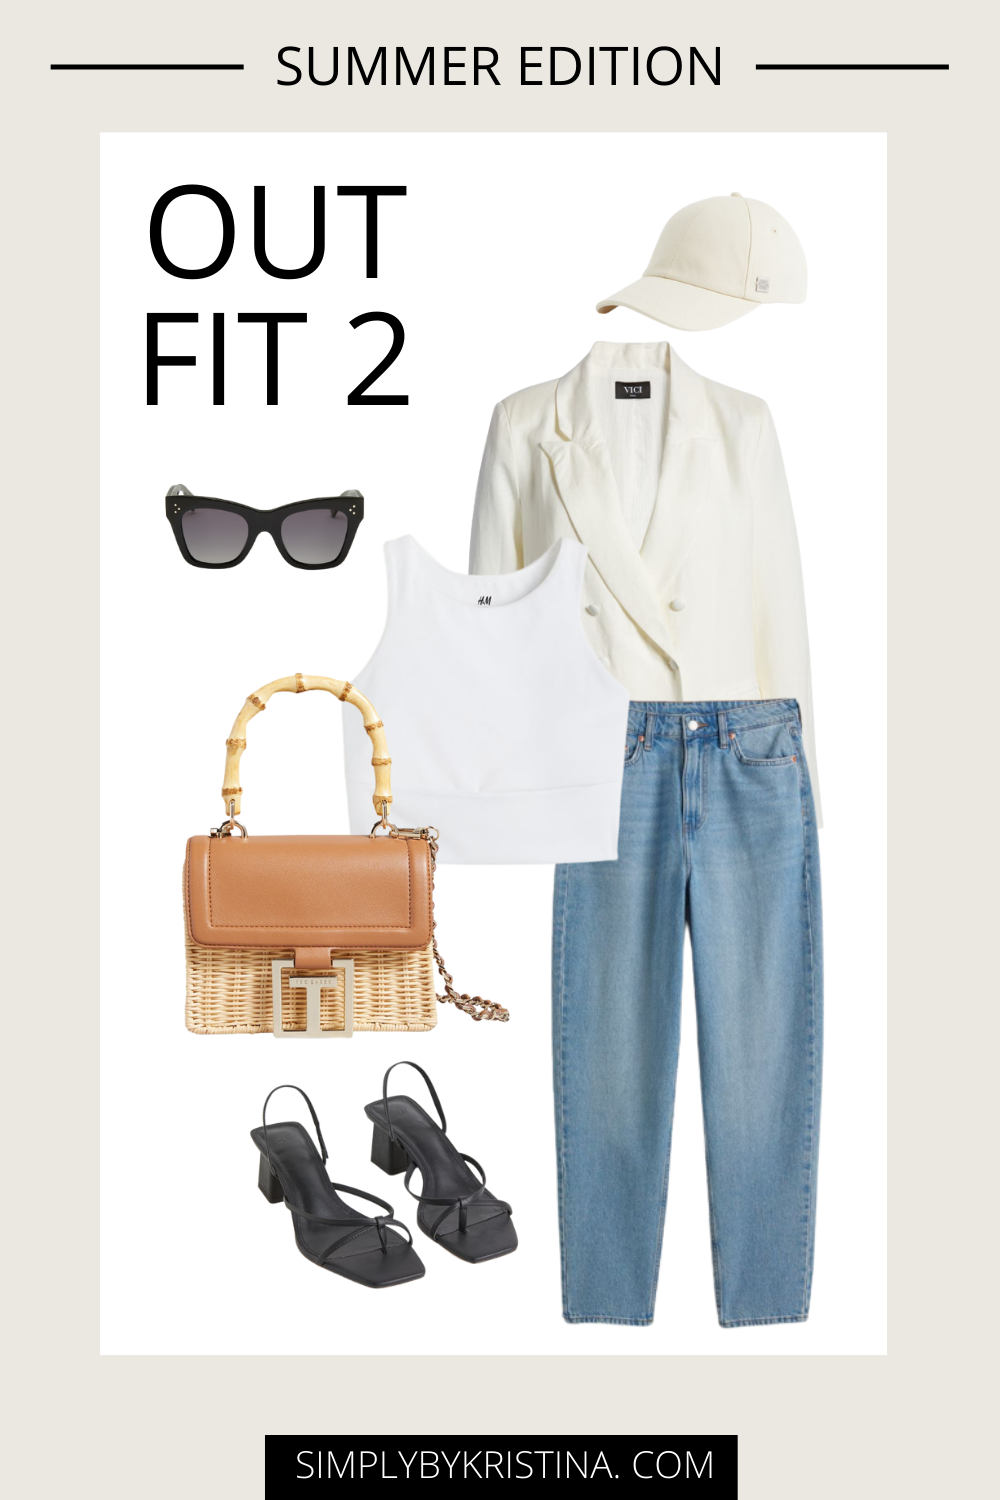 Key Staples For A Capsule Wardrobe: Summer Edition - SimplyByKristina